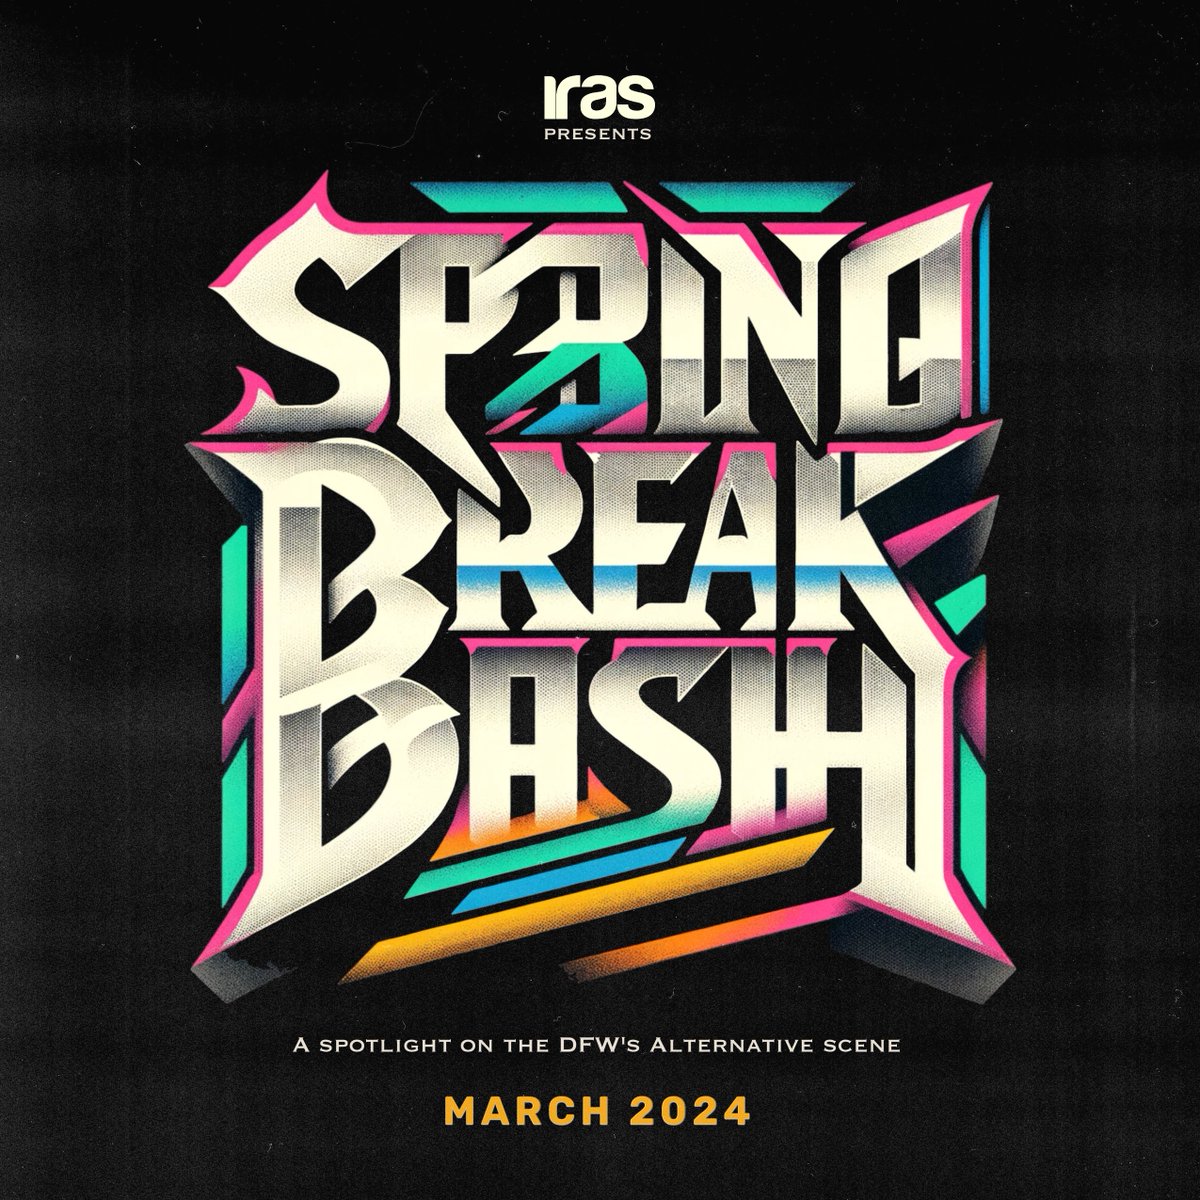 Spring Break Bash is BACK! 🌸🎸 After a decade, IRAS is thrilled to announce our first showcase of 2024 right where it all began! #SBB 2024 is a tribute to our roots, celebrating the best of Dallas-Fort Worth's emerging talent in the alternative music scene